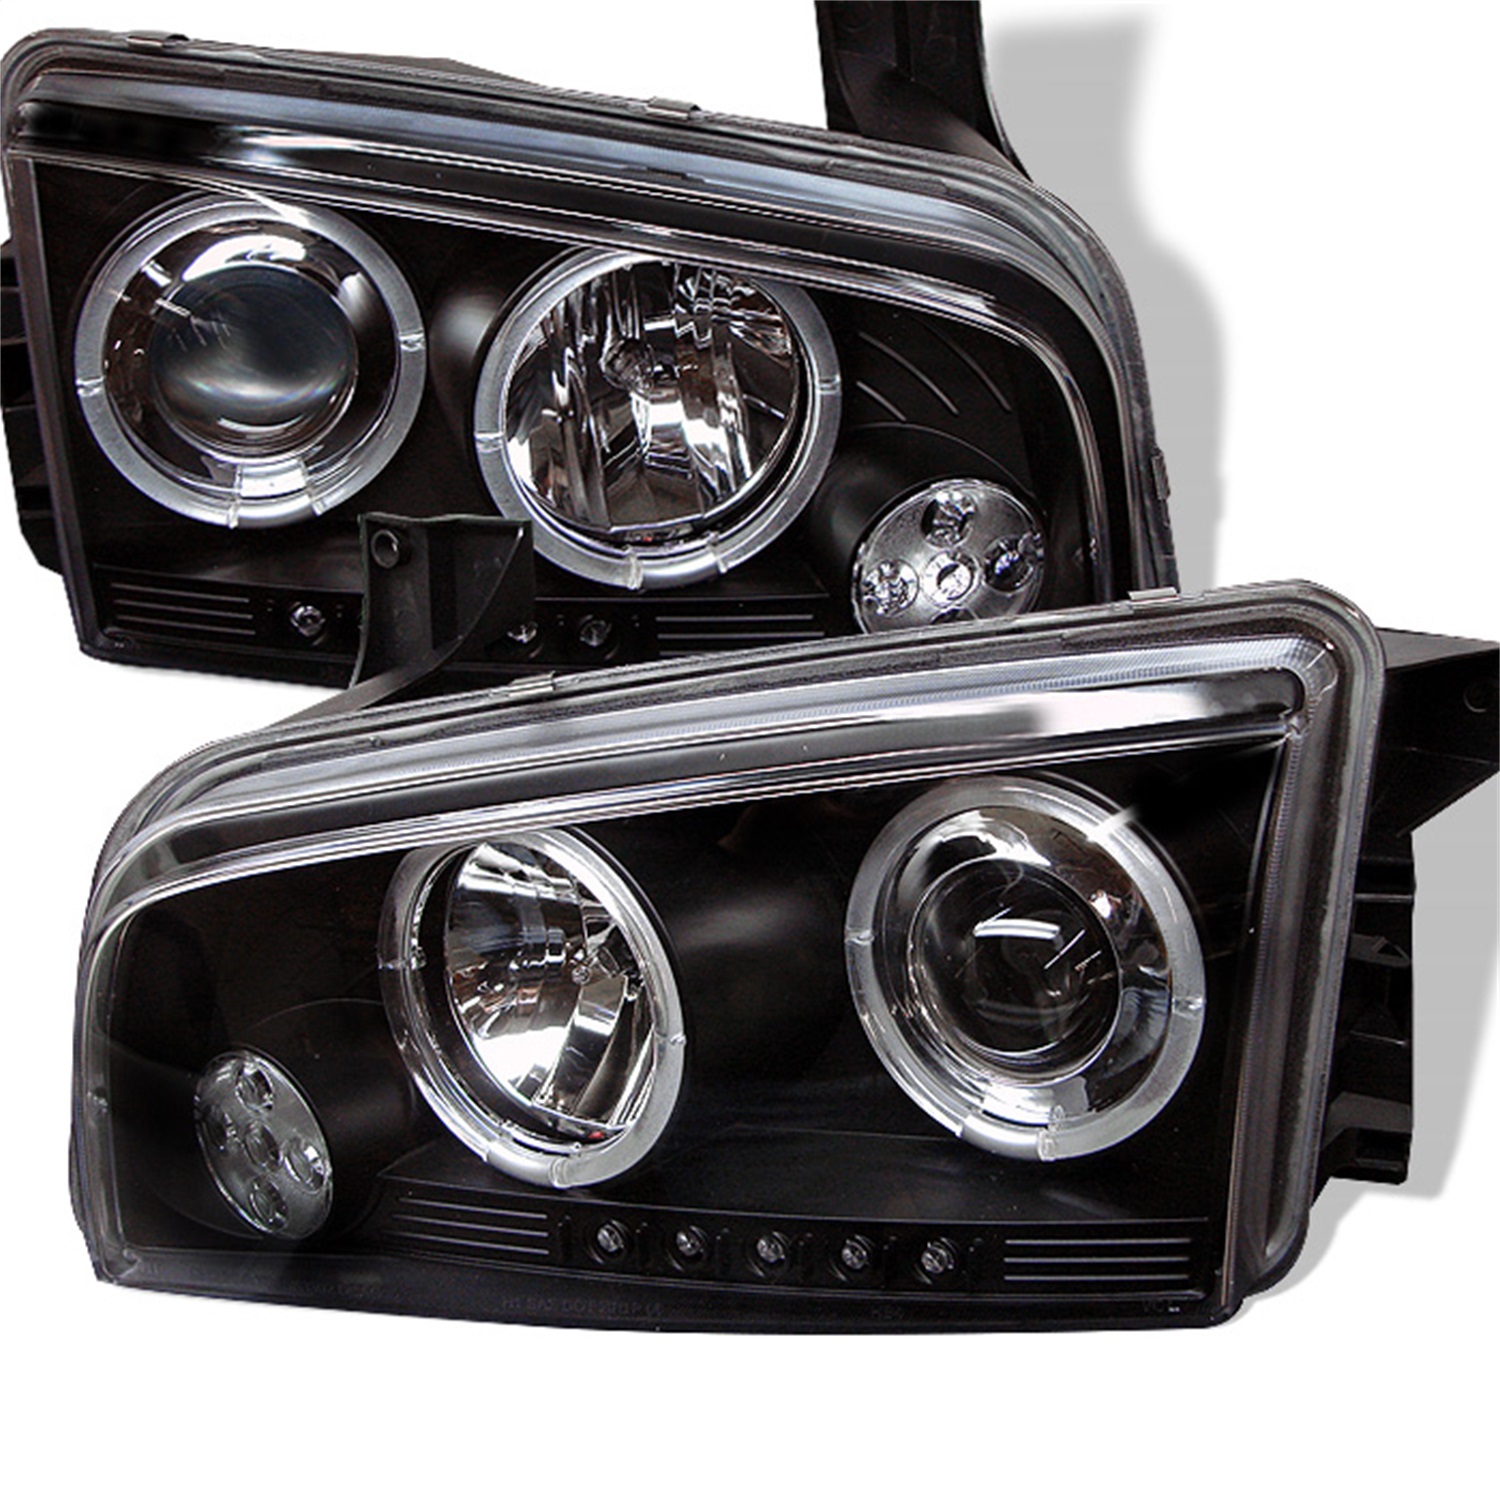 Spyder Auto 5009739 Halo LED Projector Headlights Fits 06-10 Charger